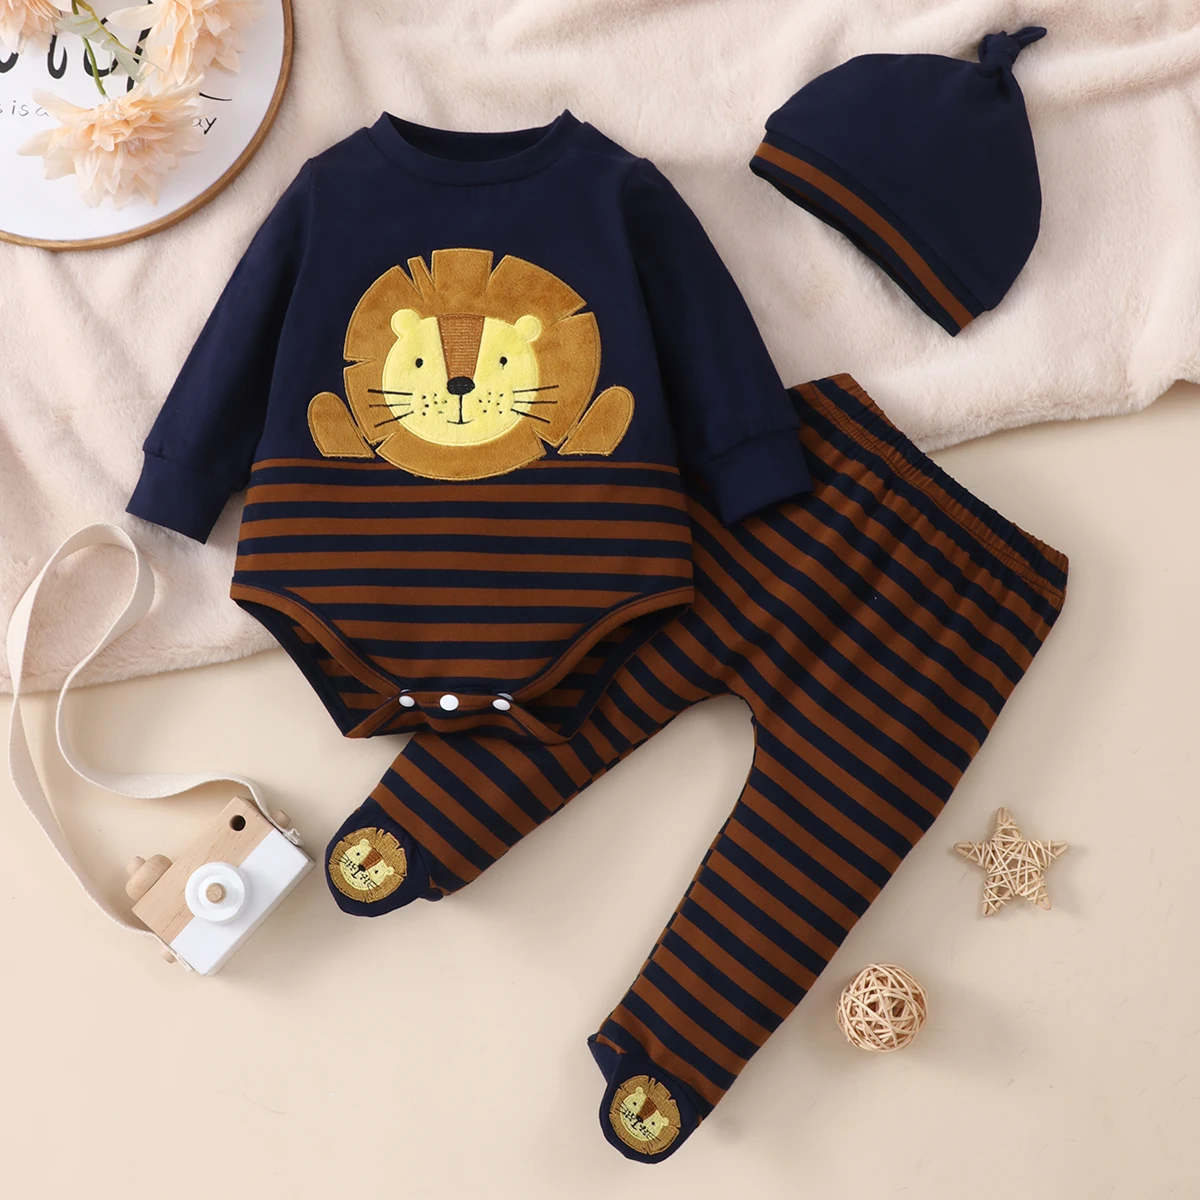 PatPat 3pcs Baby Boy/Girl Cartoon Lion Pattern Long-sleeve Striped Romper and Footed Pants Set sun baby clothing set Baby Clothing Set